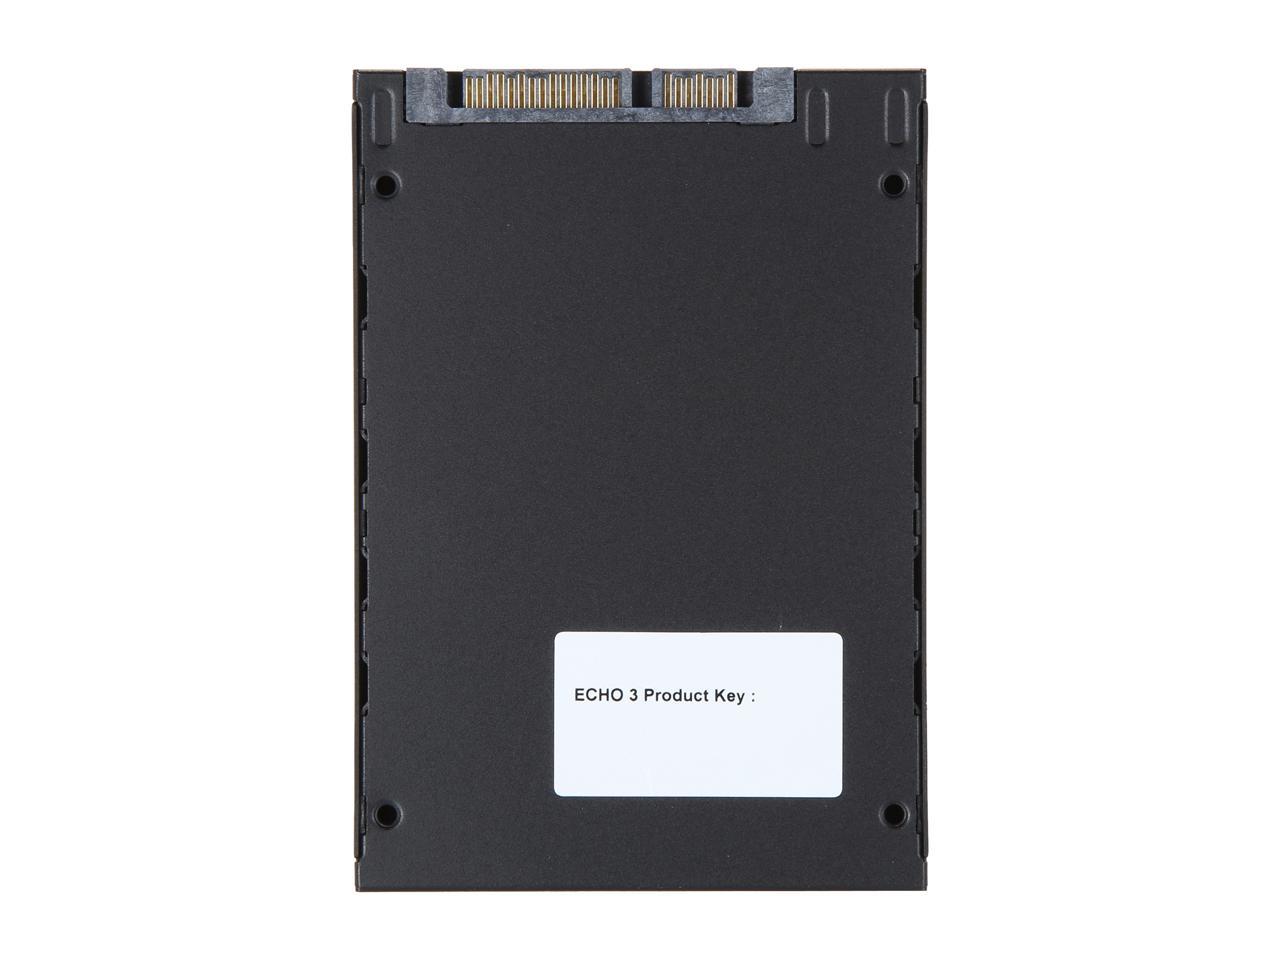 Silicon Power Ace A55 2.5" 256GB SATA III 3D TLC Internal Solid State